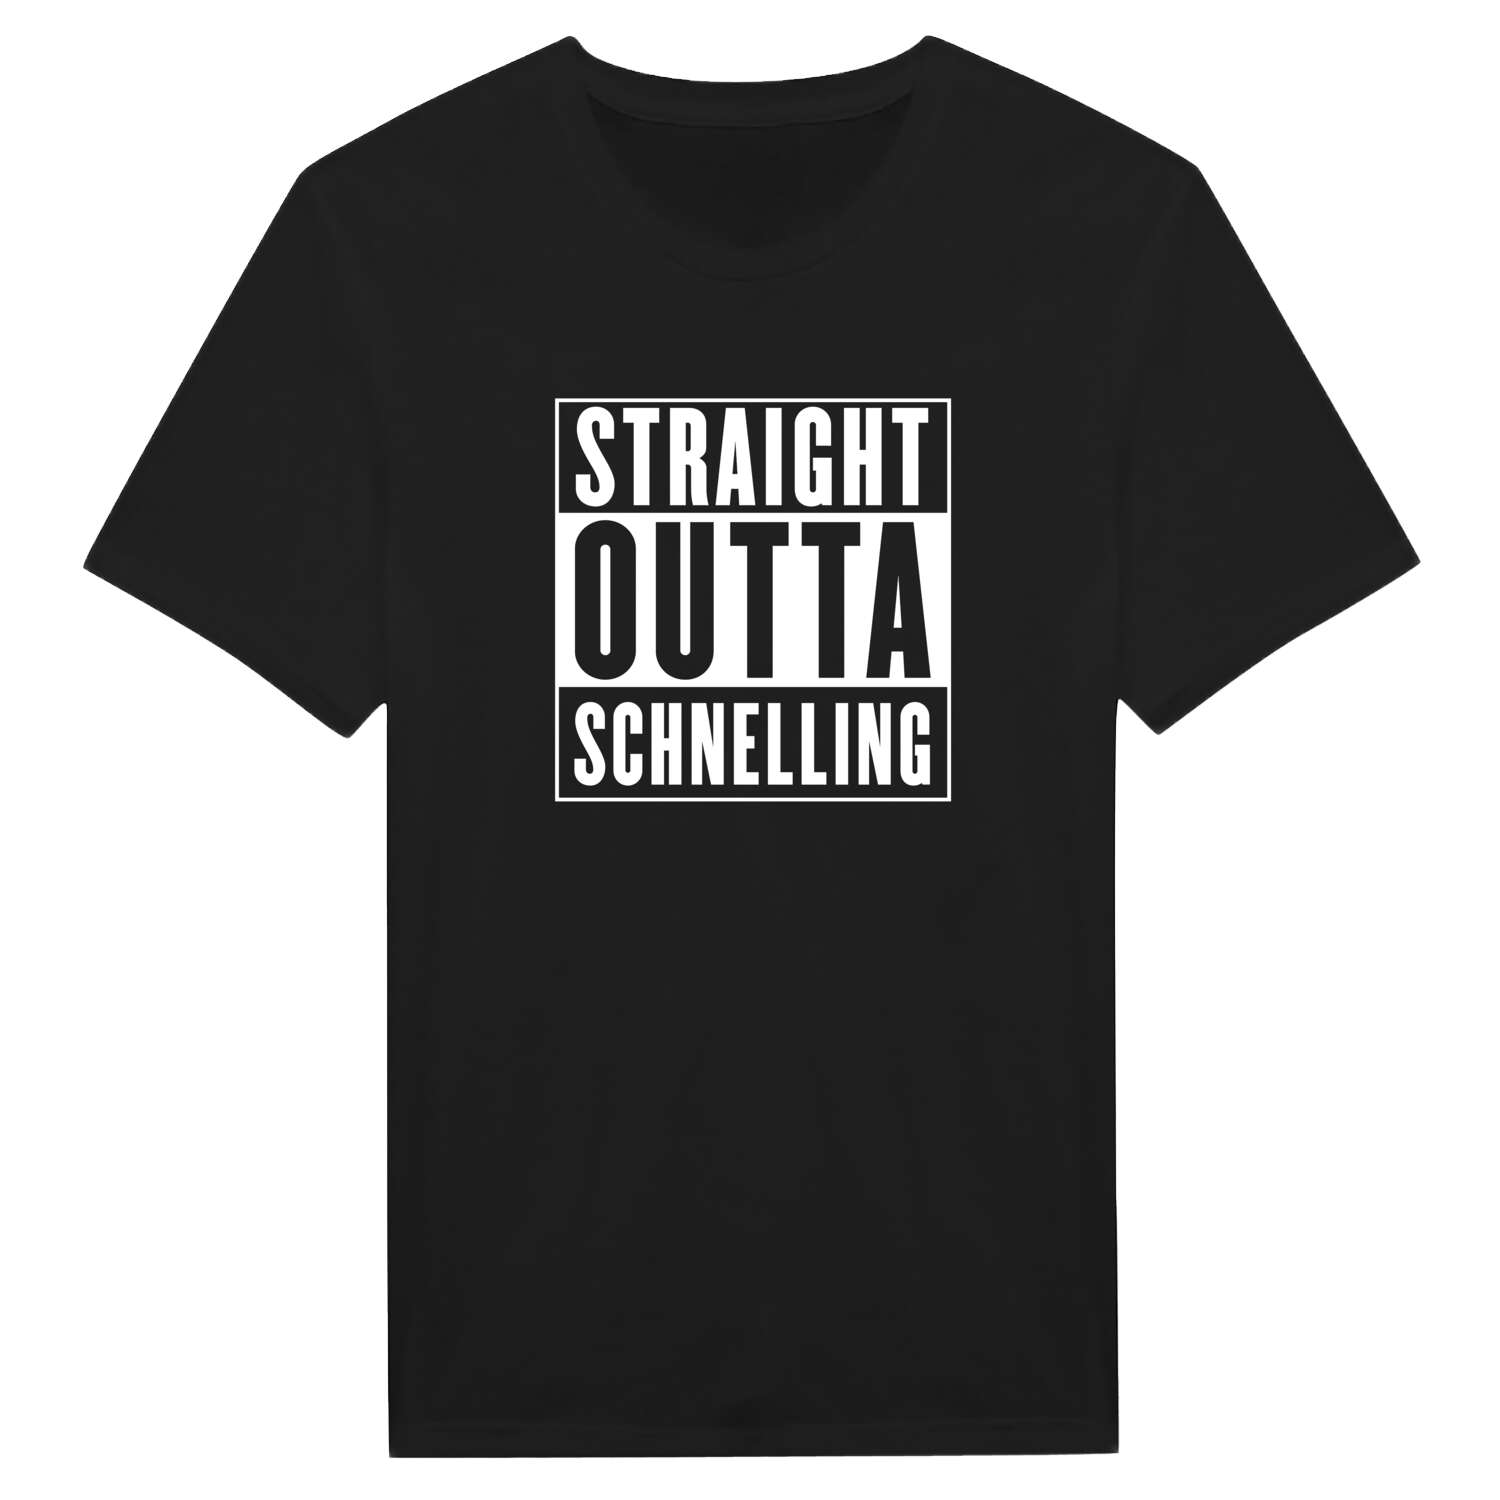 Schnelling T-Shirt »Straight Outta«